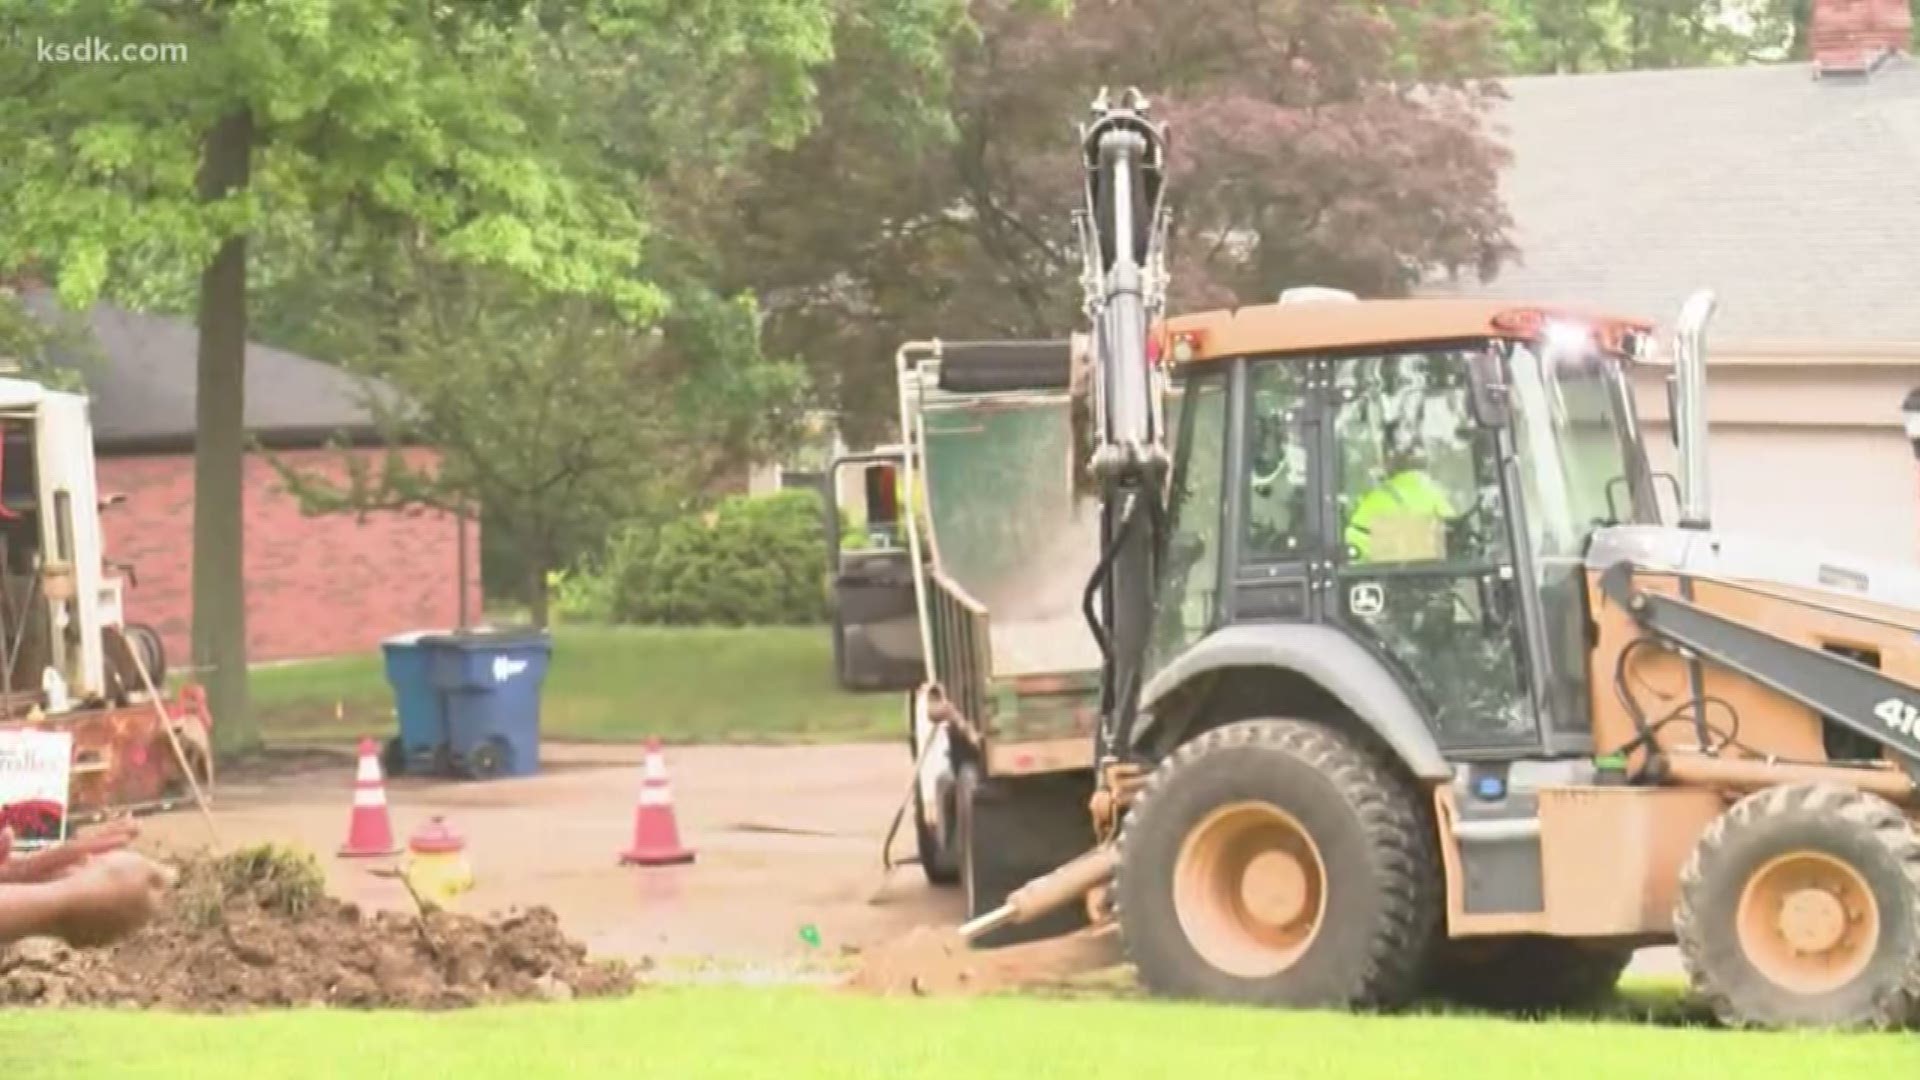 Water main break in Chesterfield leaves some residents without water